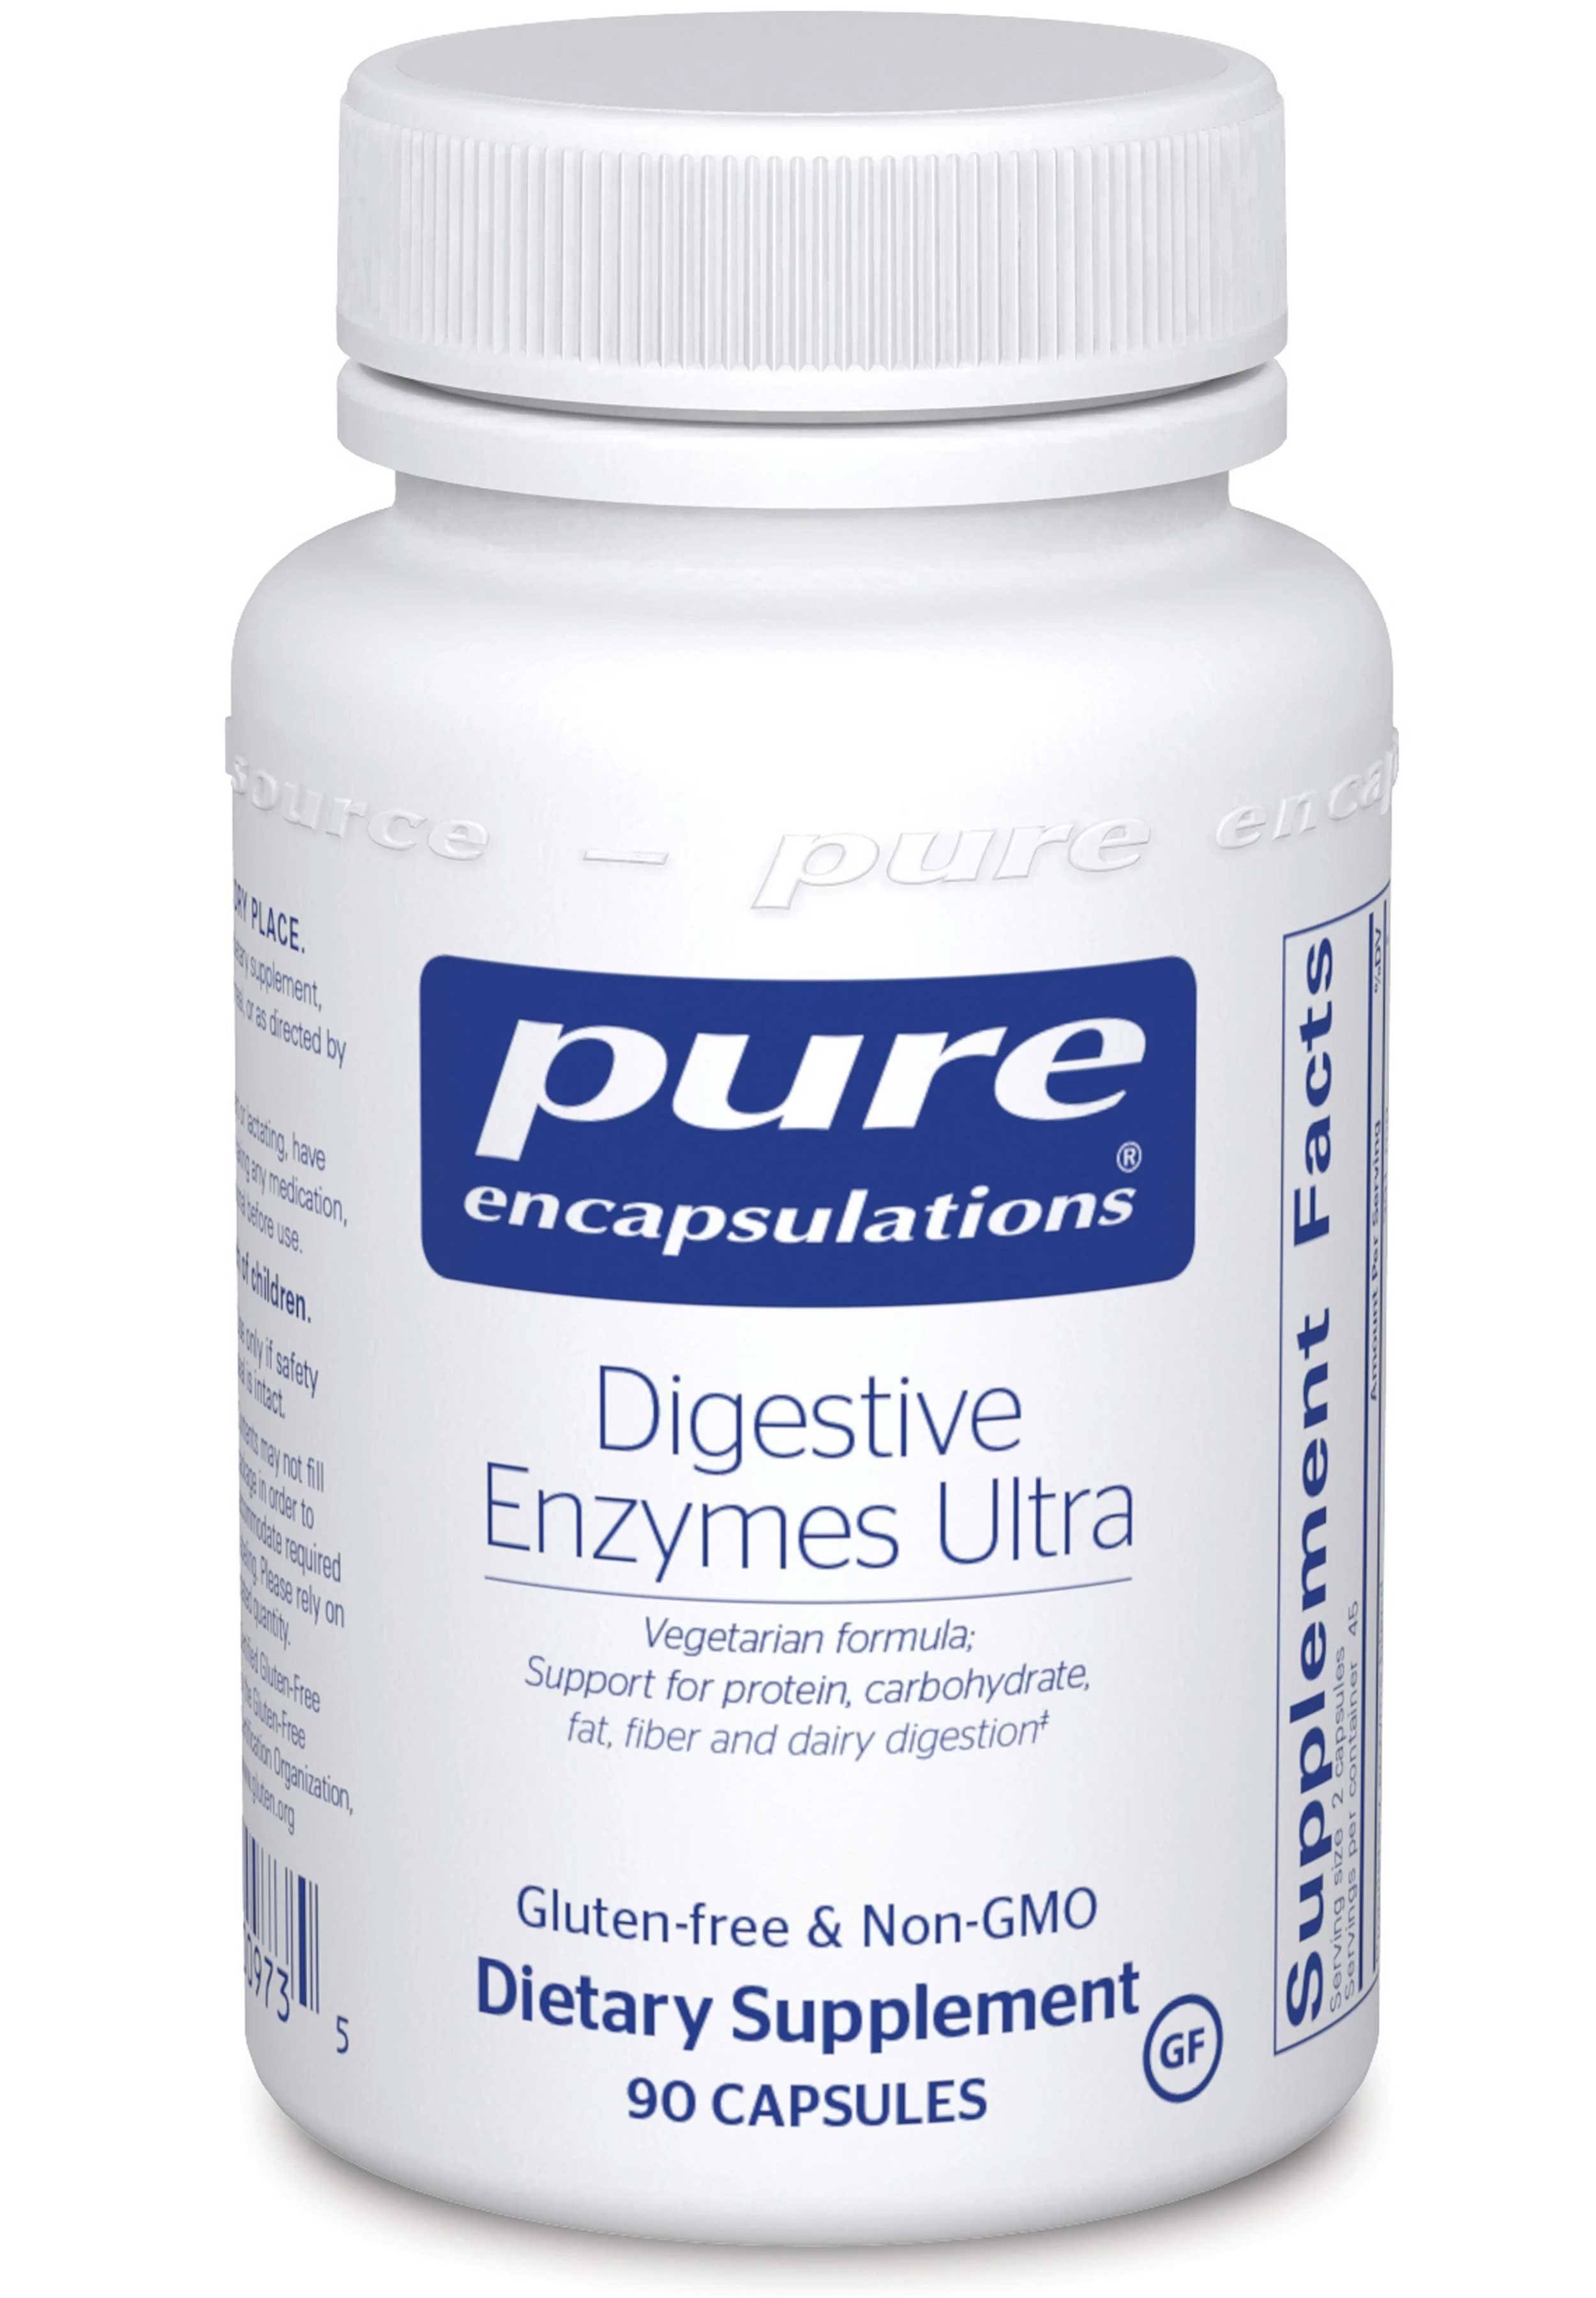 Pure Encapsulations Digestive Enzymes Ultra Dietary Supplement - 90ct